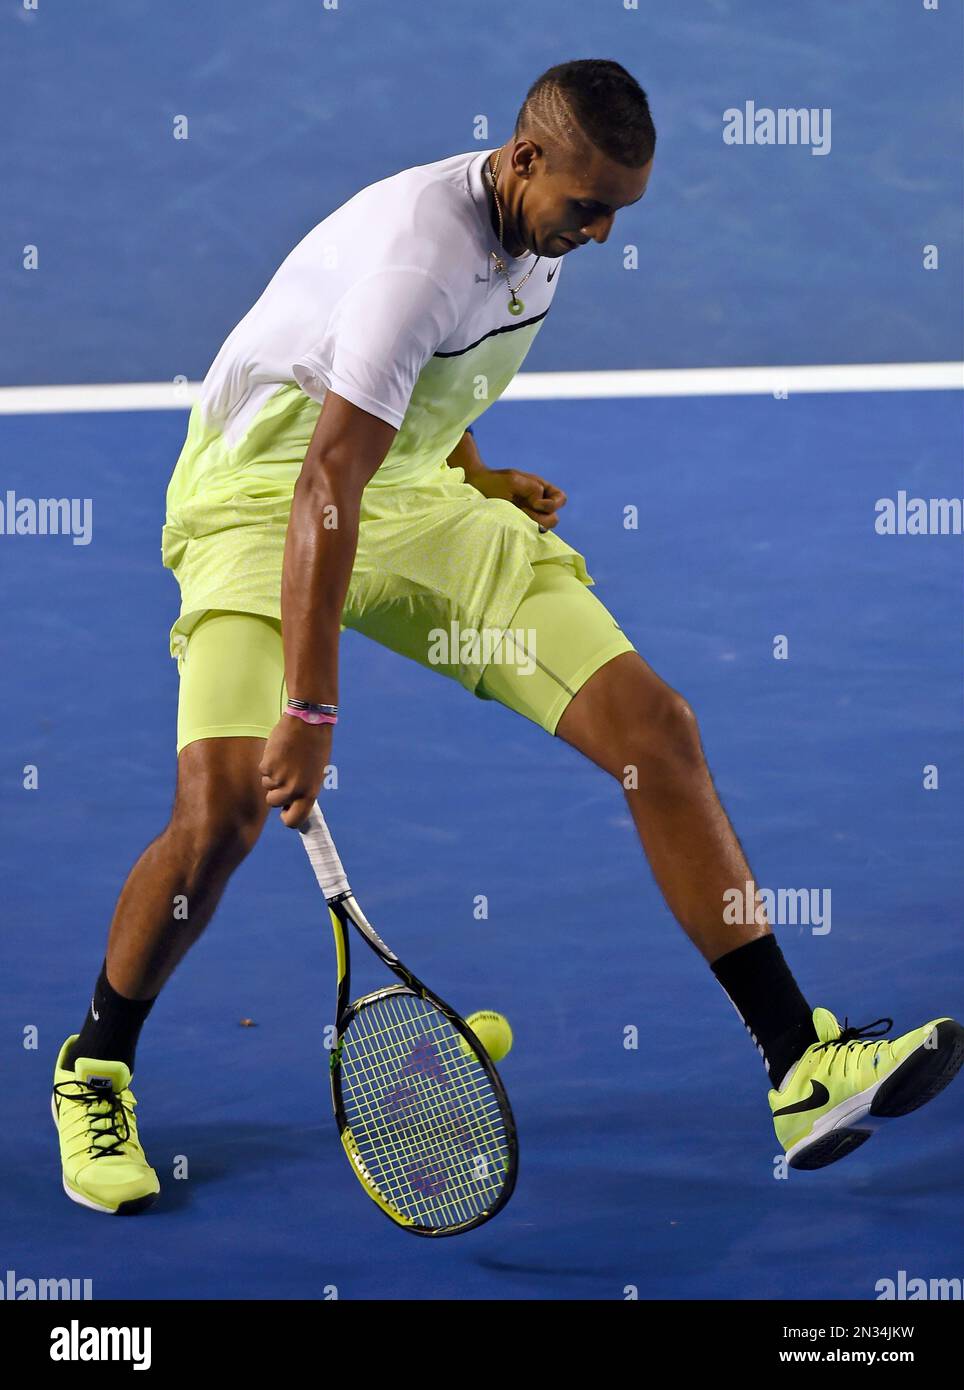 Nick Kyrgios of Australia plays a shot through legs as he plays Andy Murray of Britain during their quarterfinal match at the Australian Open tennis championship in Melbourne, Australia, Tuesday, Jan